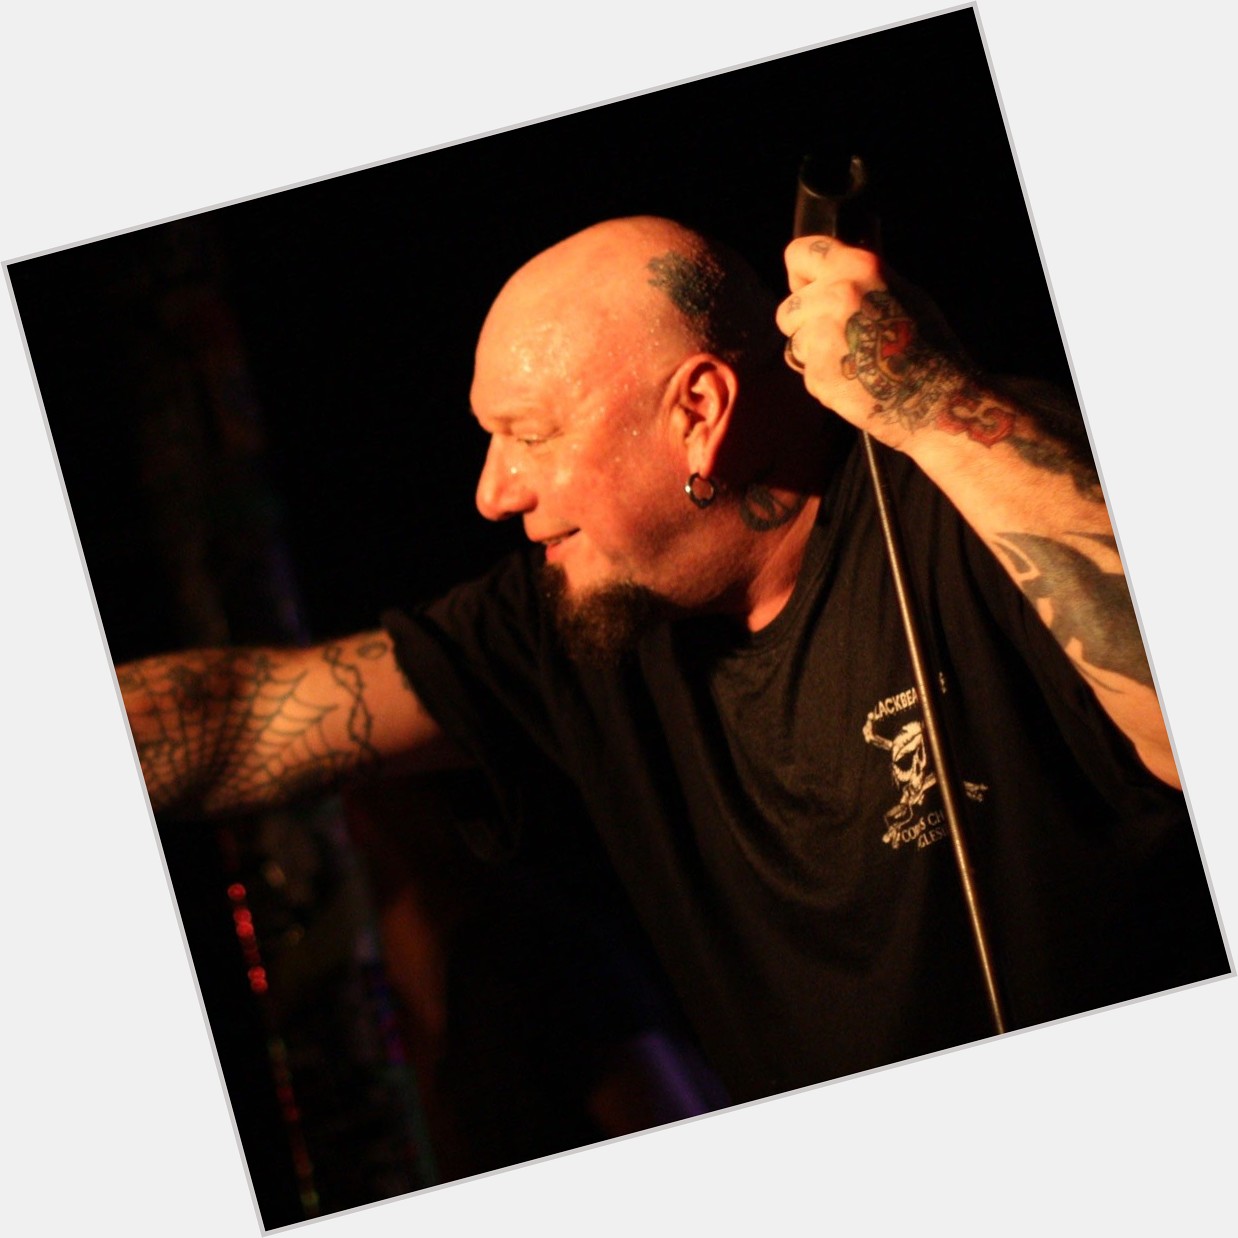 <a href="/hot-men/paul-dianno/where-dating-news-photos">Paul Dianno</a> Average body,  dark brown hair & hairstyles